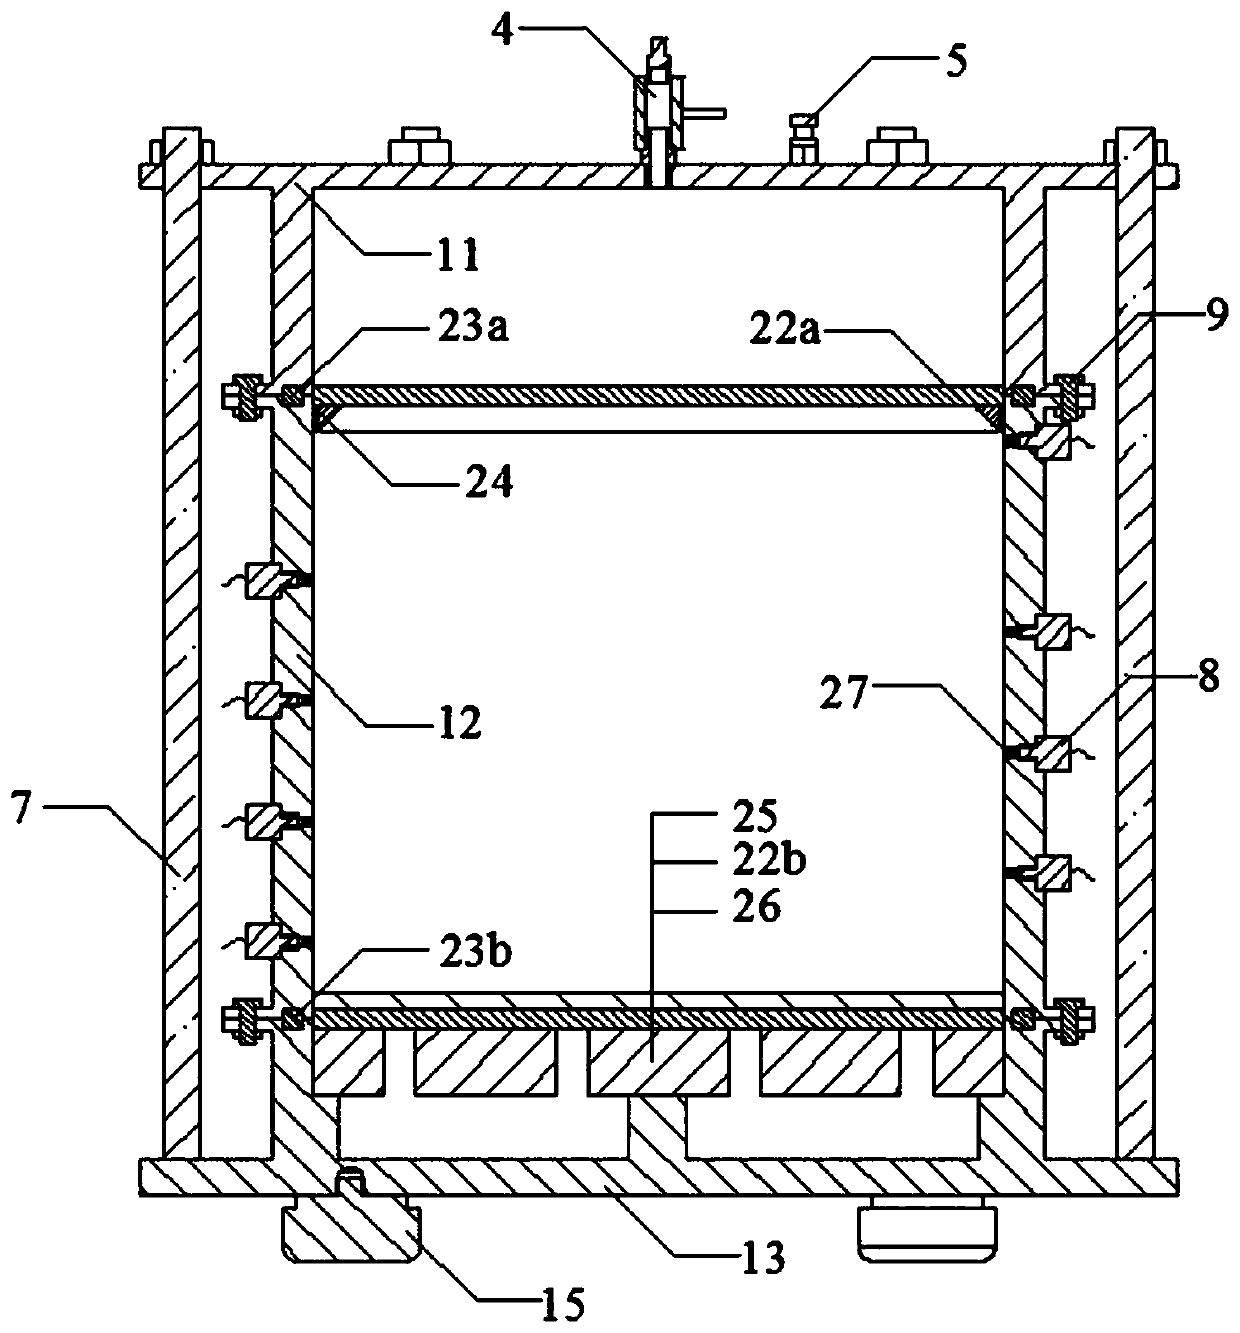 Full-automatic hydraulic permeation consolidation device